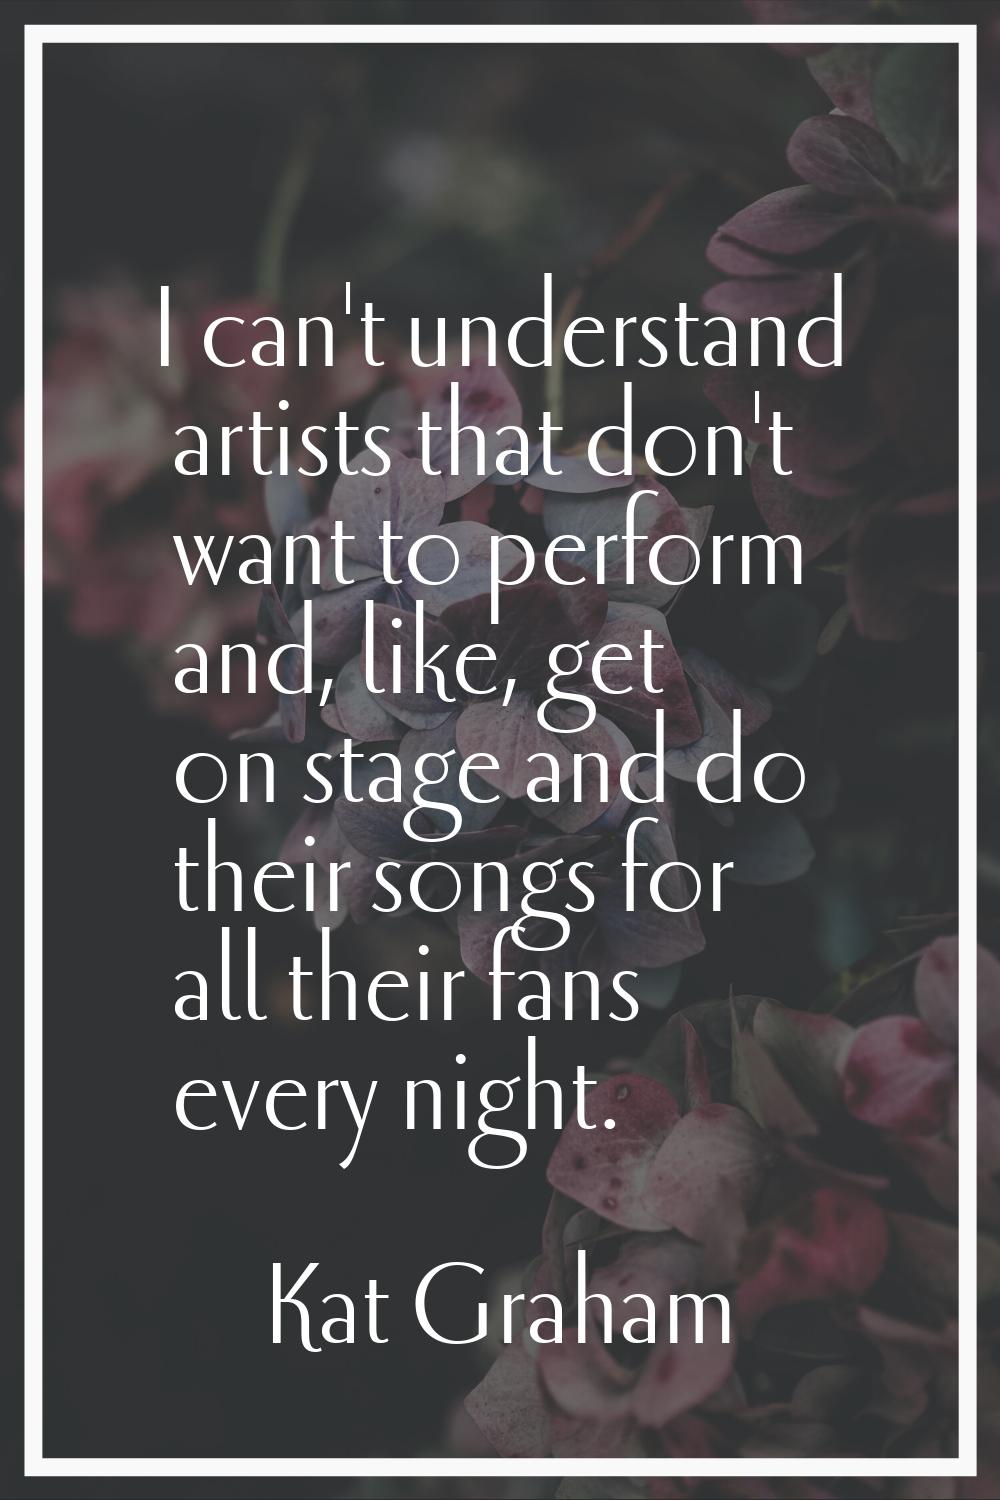 I can't understand artists that don't want to perform and, like, get on stage and do their songs fo